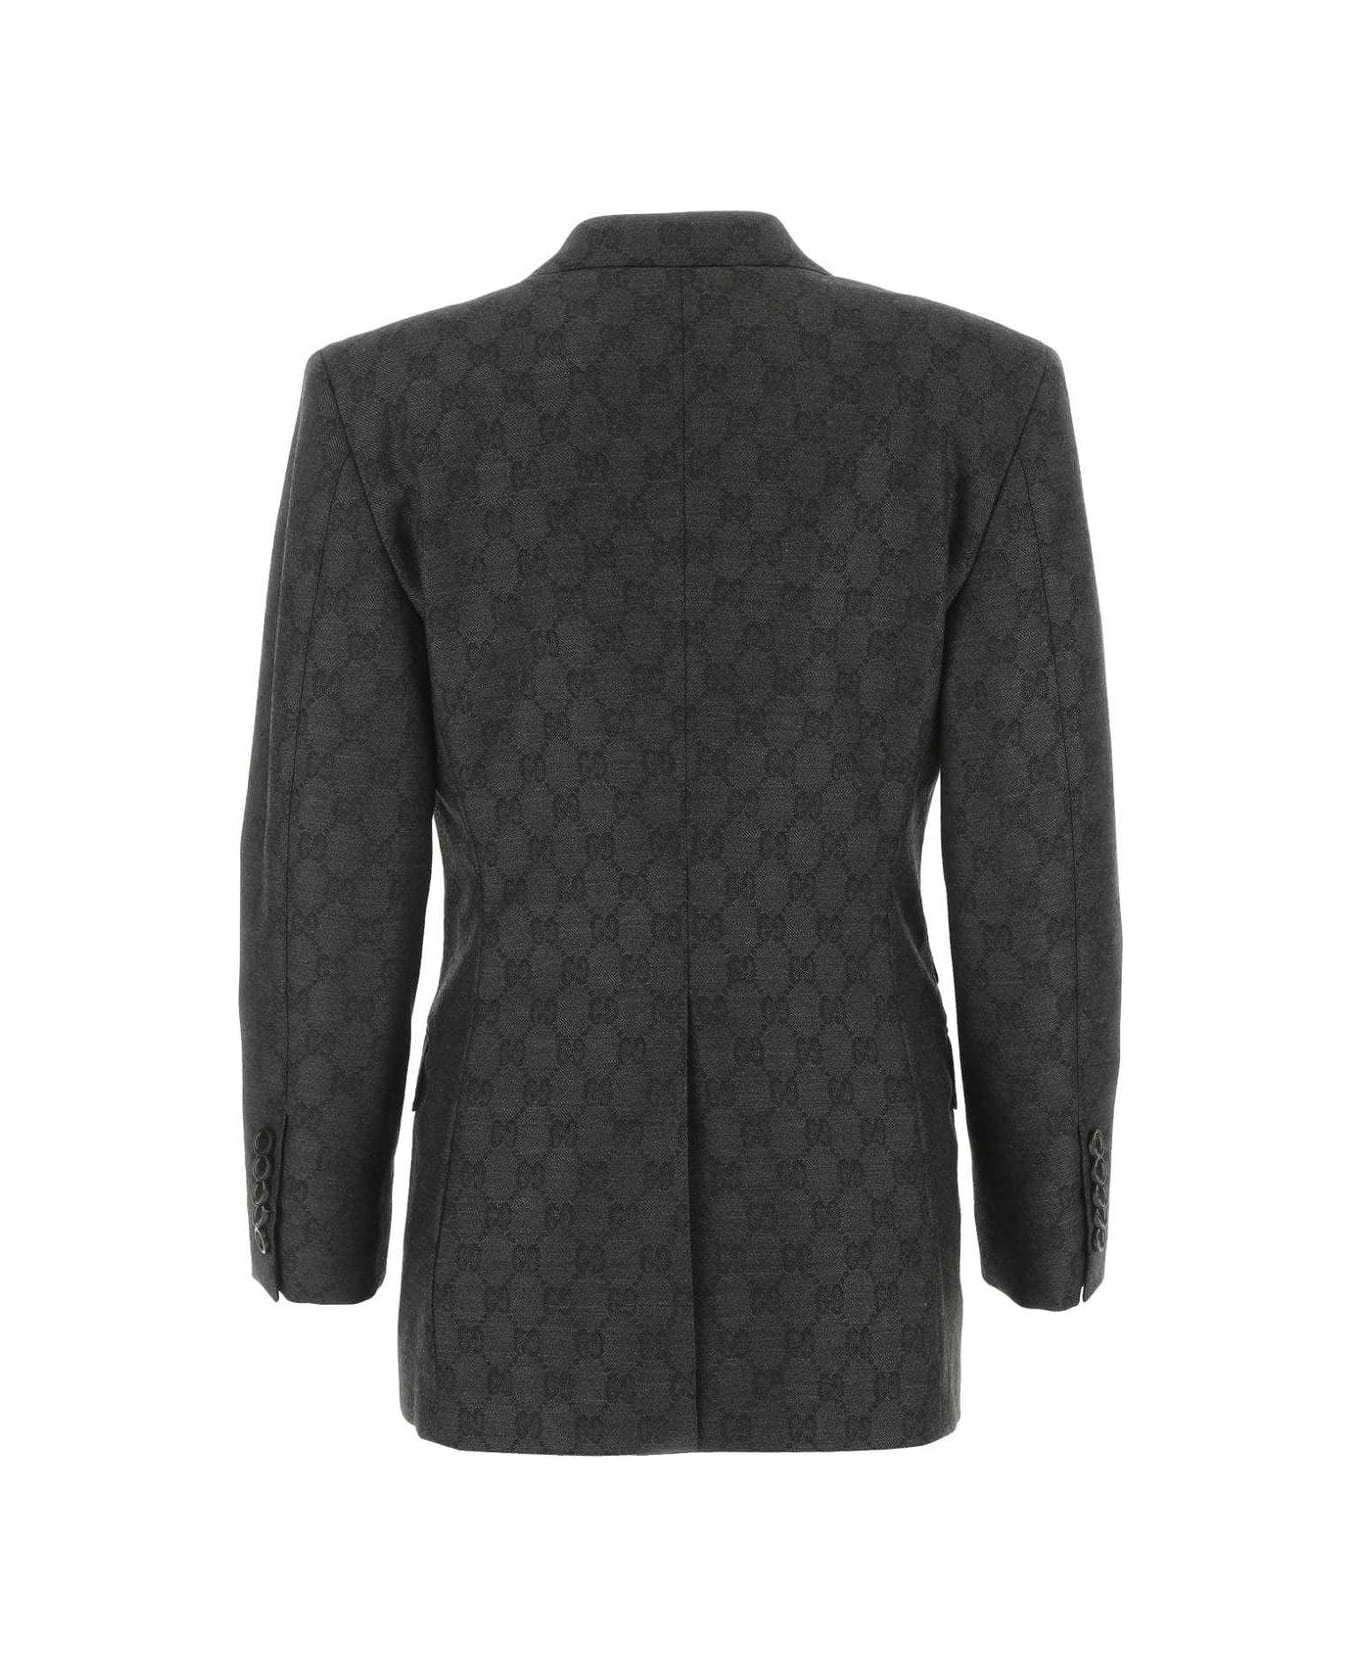 Gucci Gg Jacquard Double-breasted Jacket